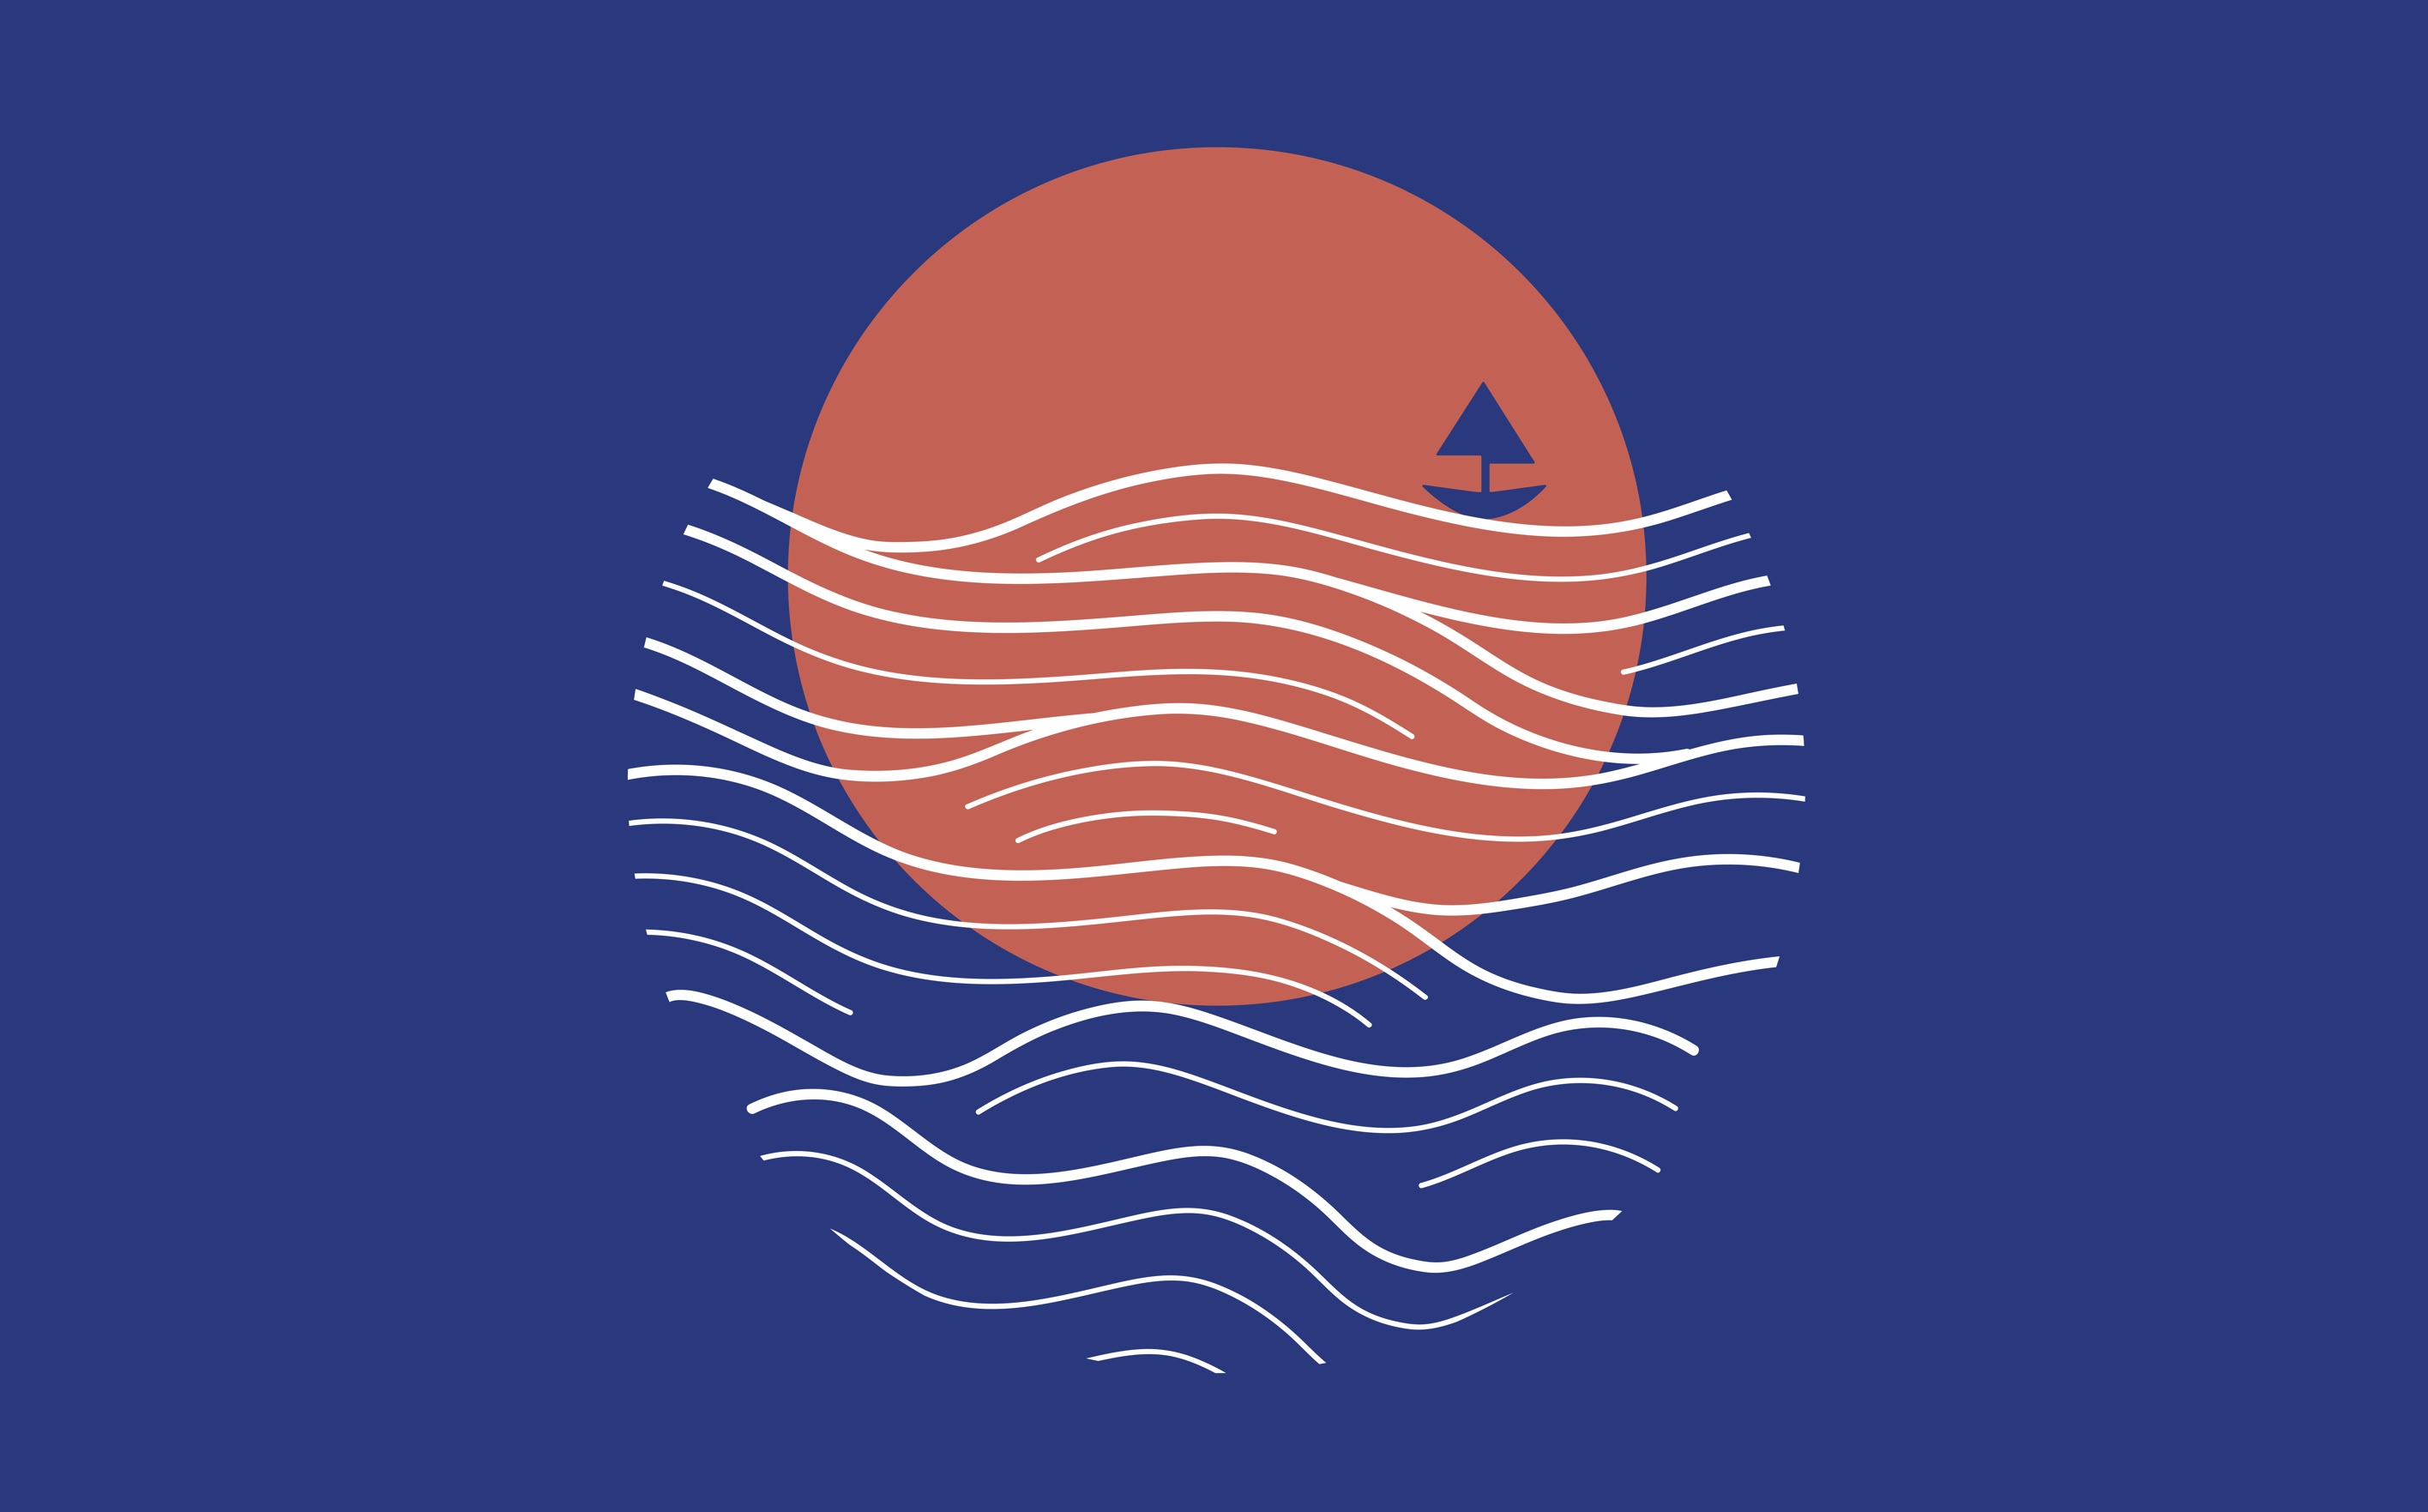 Dark blue flag with orange sun, white waves, and a blue boat